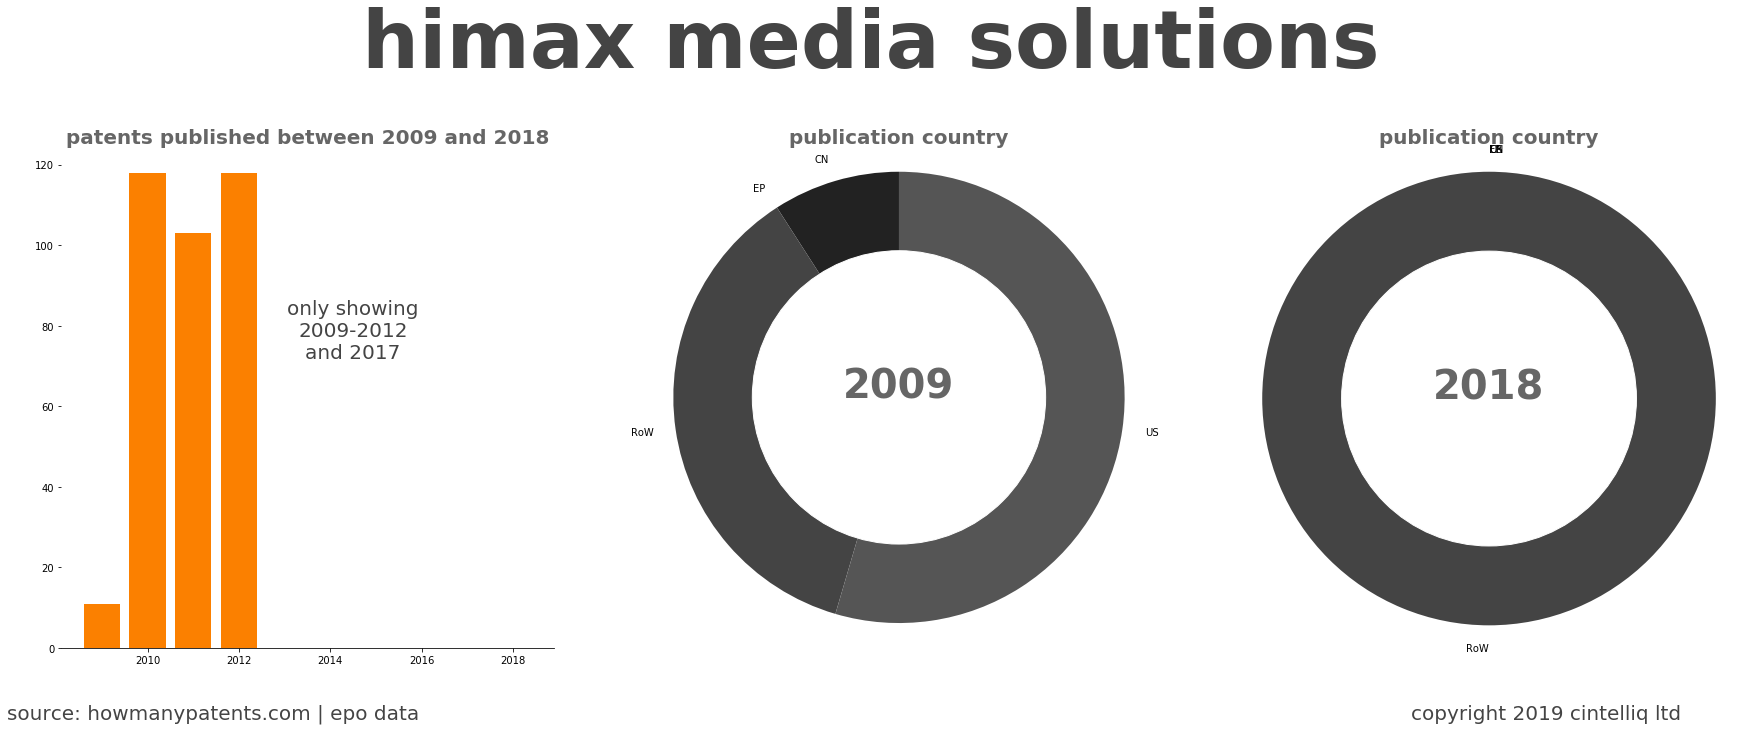 summary of patents for Himax Media Solutions